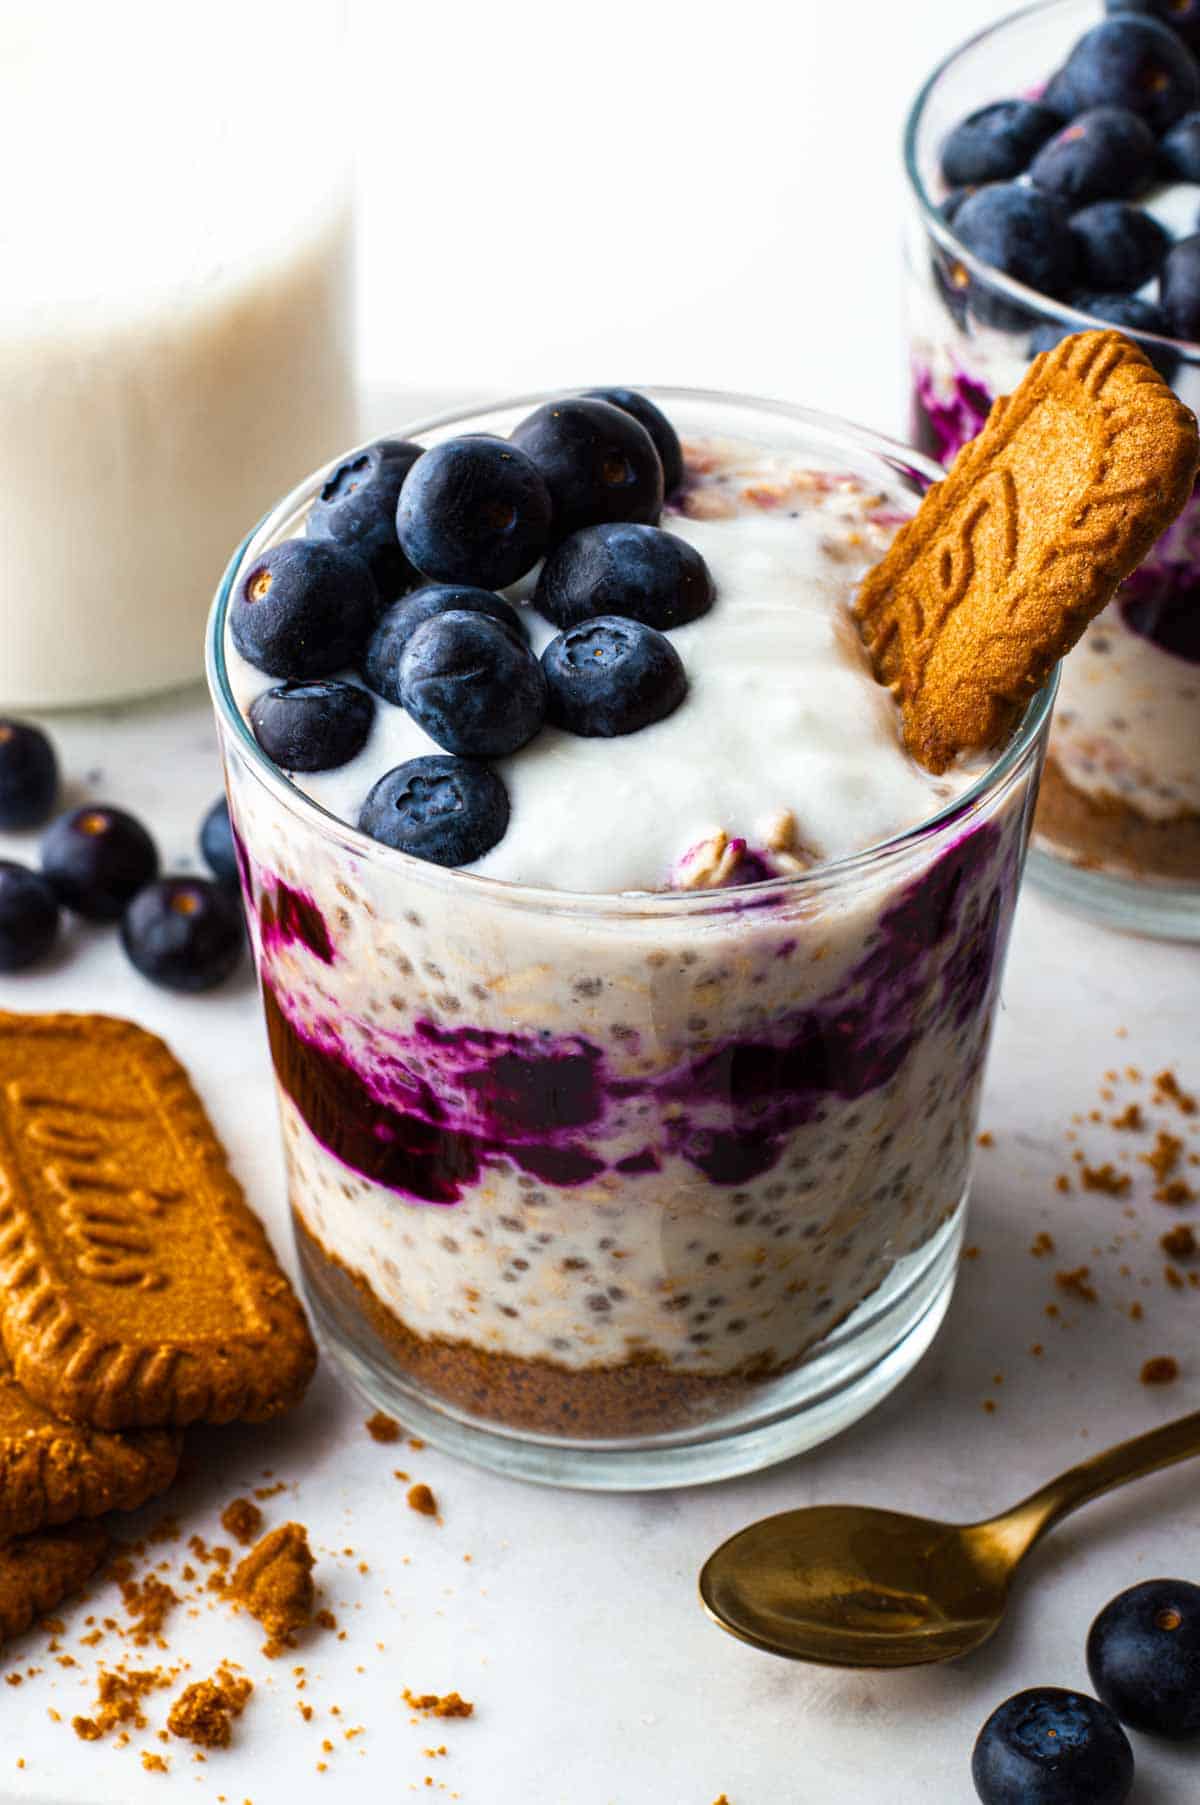 Overnight oat blueberry cheesecake in a glass with fresh blueberries on top.